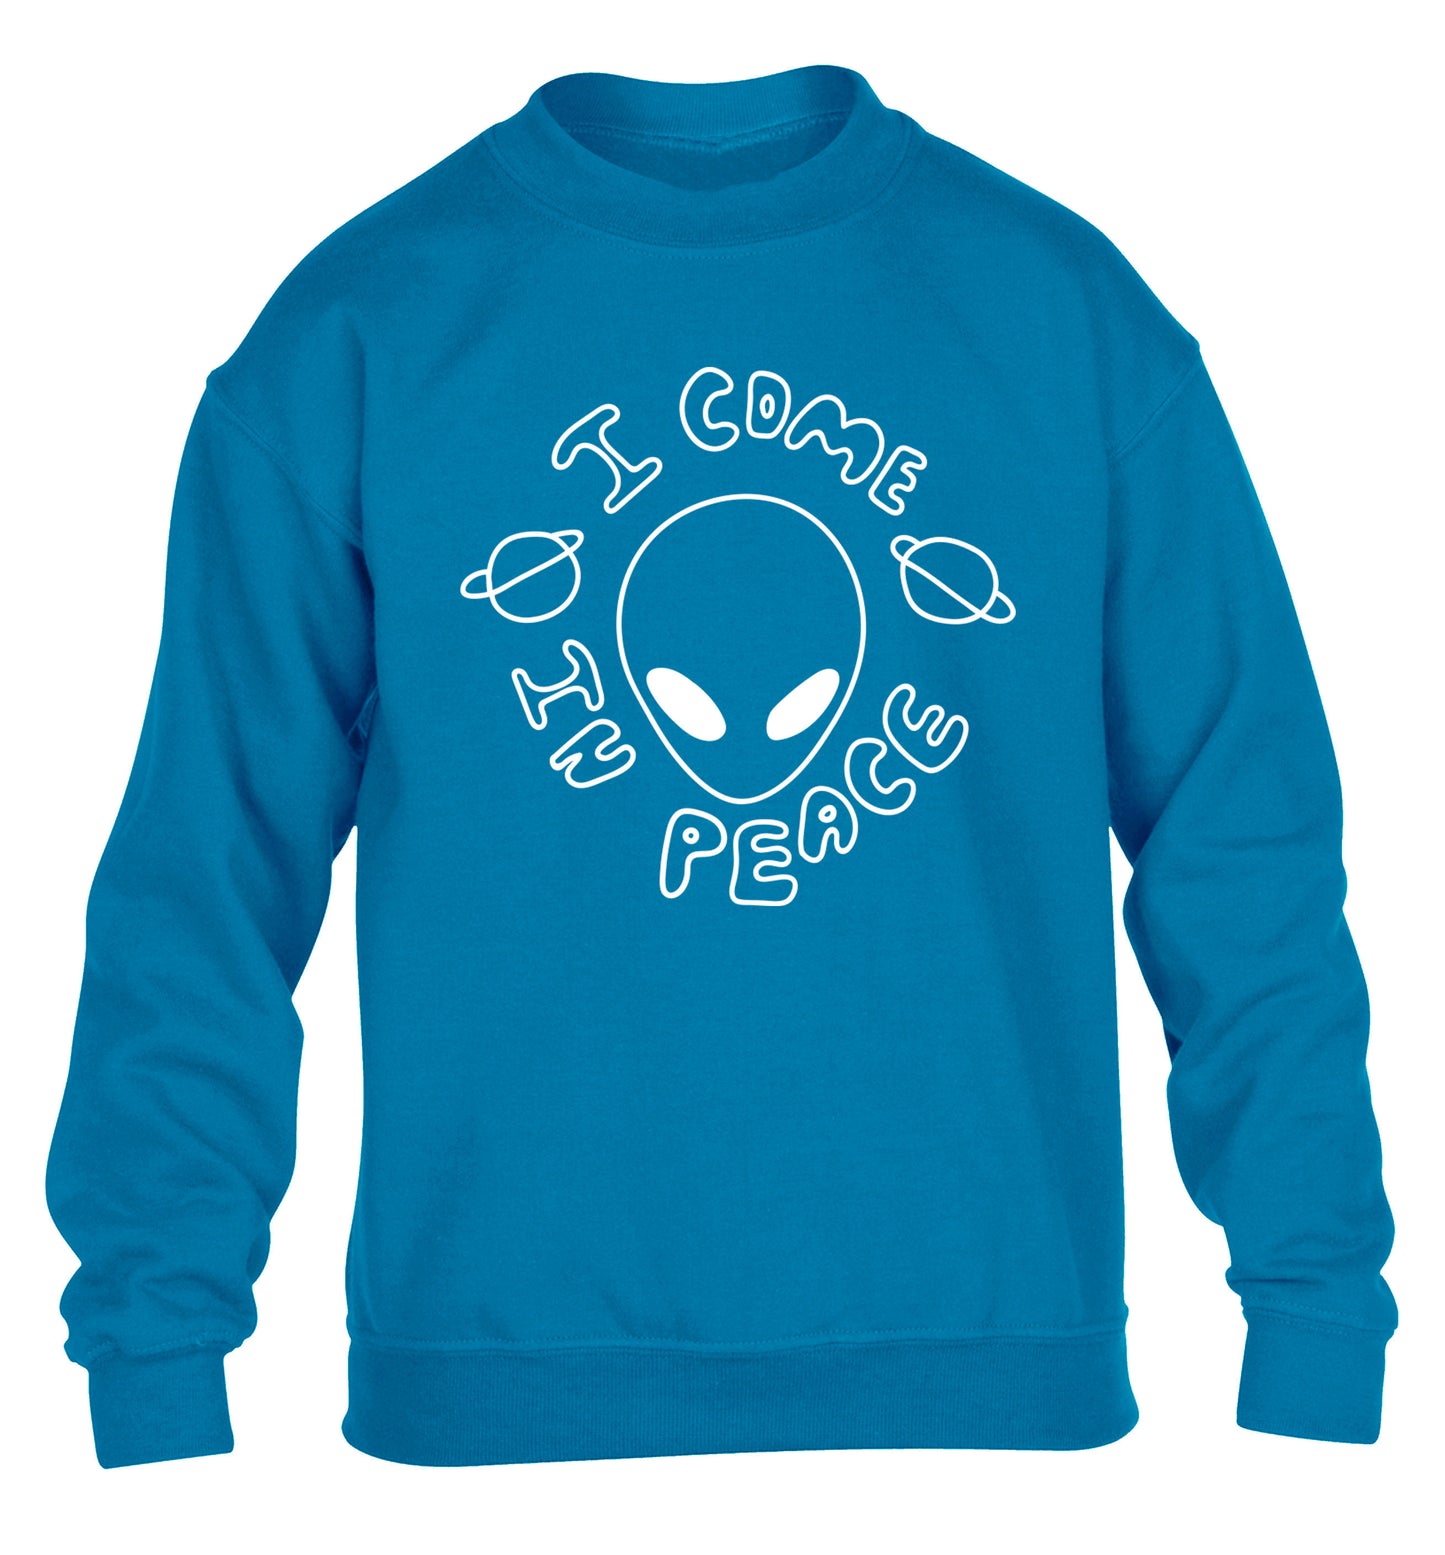 I come in peace children's blue sweater 12-14 Years